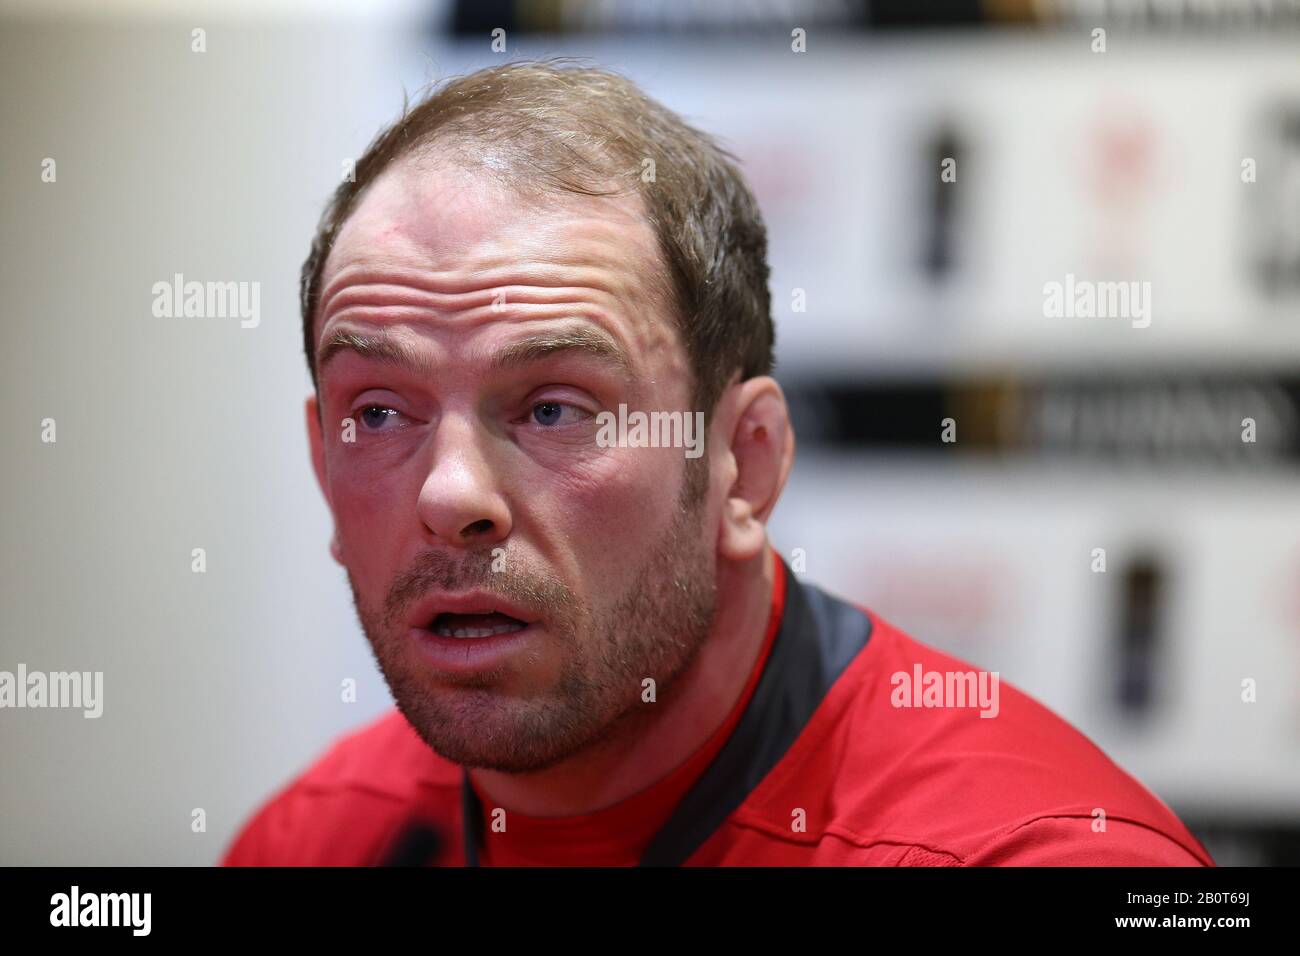 Cardiff, UK. 21st Feb, 2020. Alun Wyn Jones, the Wales rugby team captain speaks to the media . Wales rugby captains run at the Principality Stadium in Cardiff, South Wales on Friday 21st February 2020 the team are preparing for their next Guinness Six nations championship match against France tomorrow. pic by Andrew Orchard/Alamy Live News Stock Photo